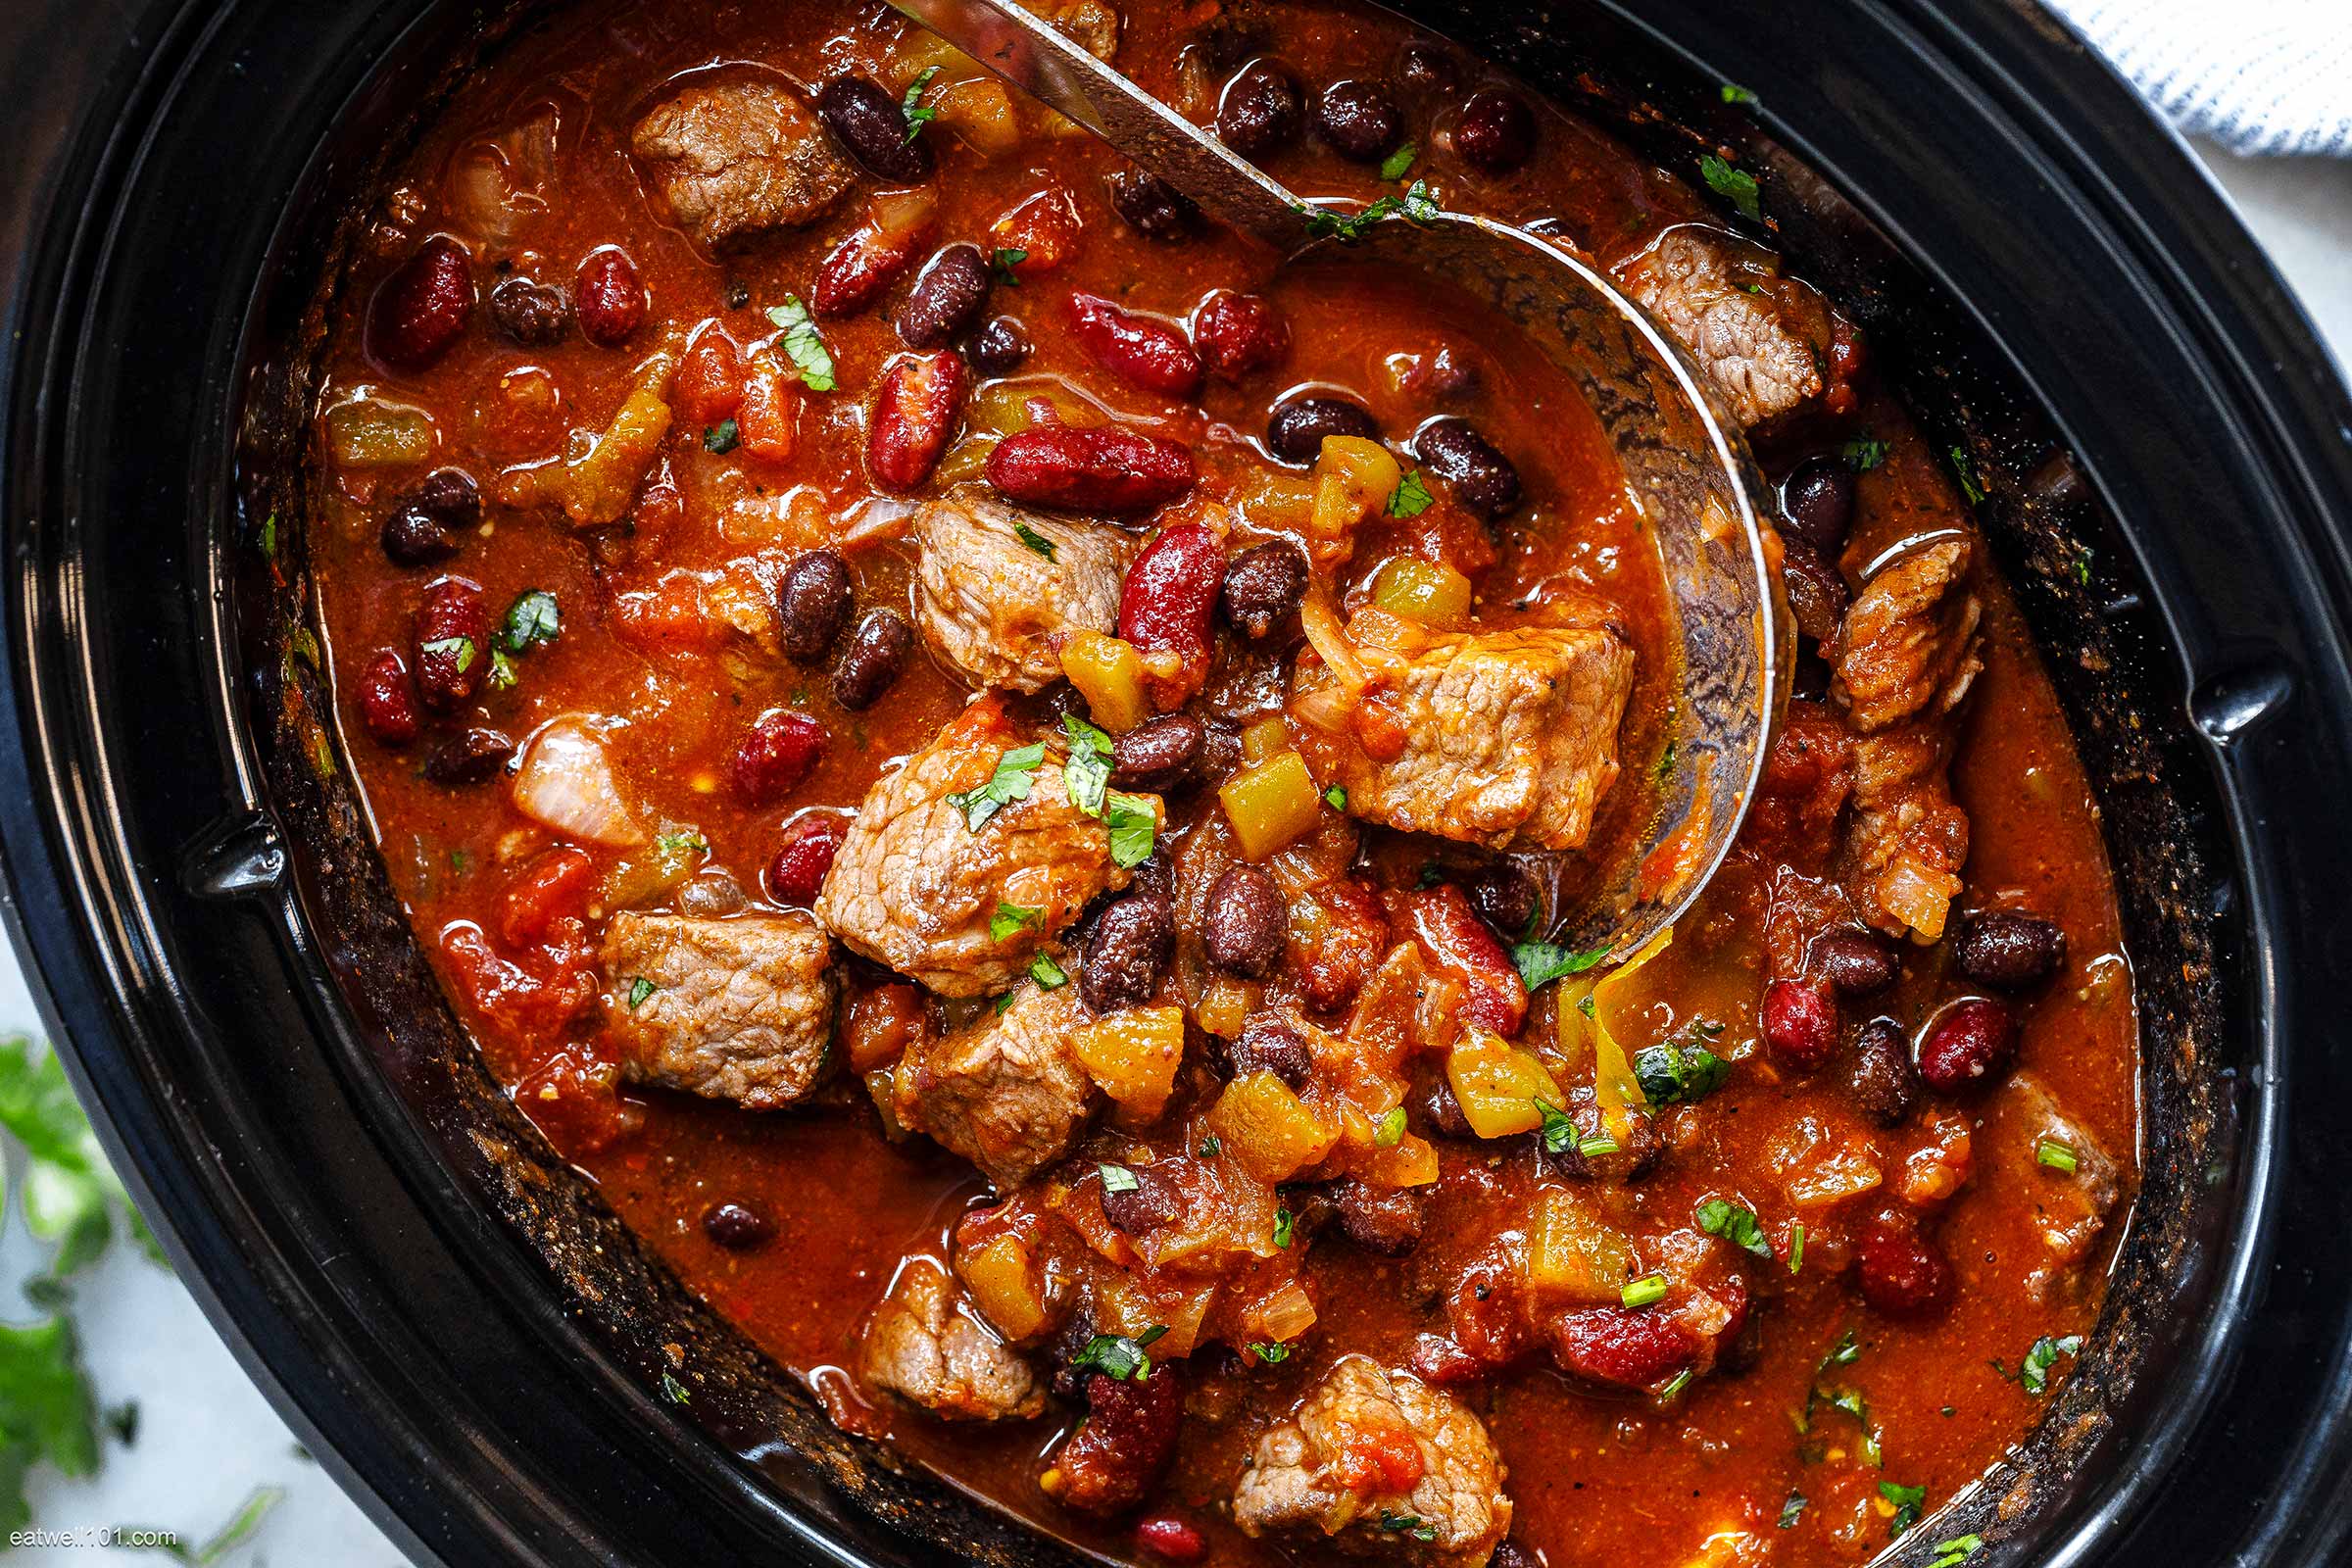 7 Easy Chili Recipes to Warm You Up